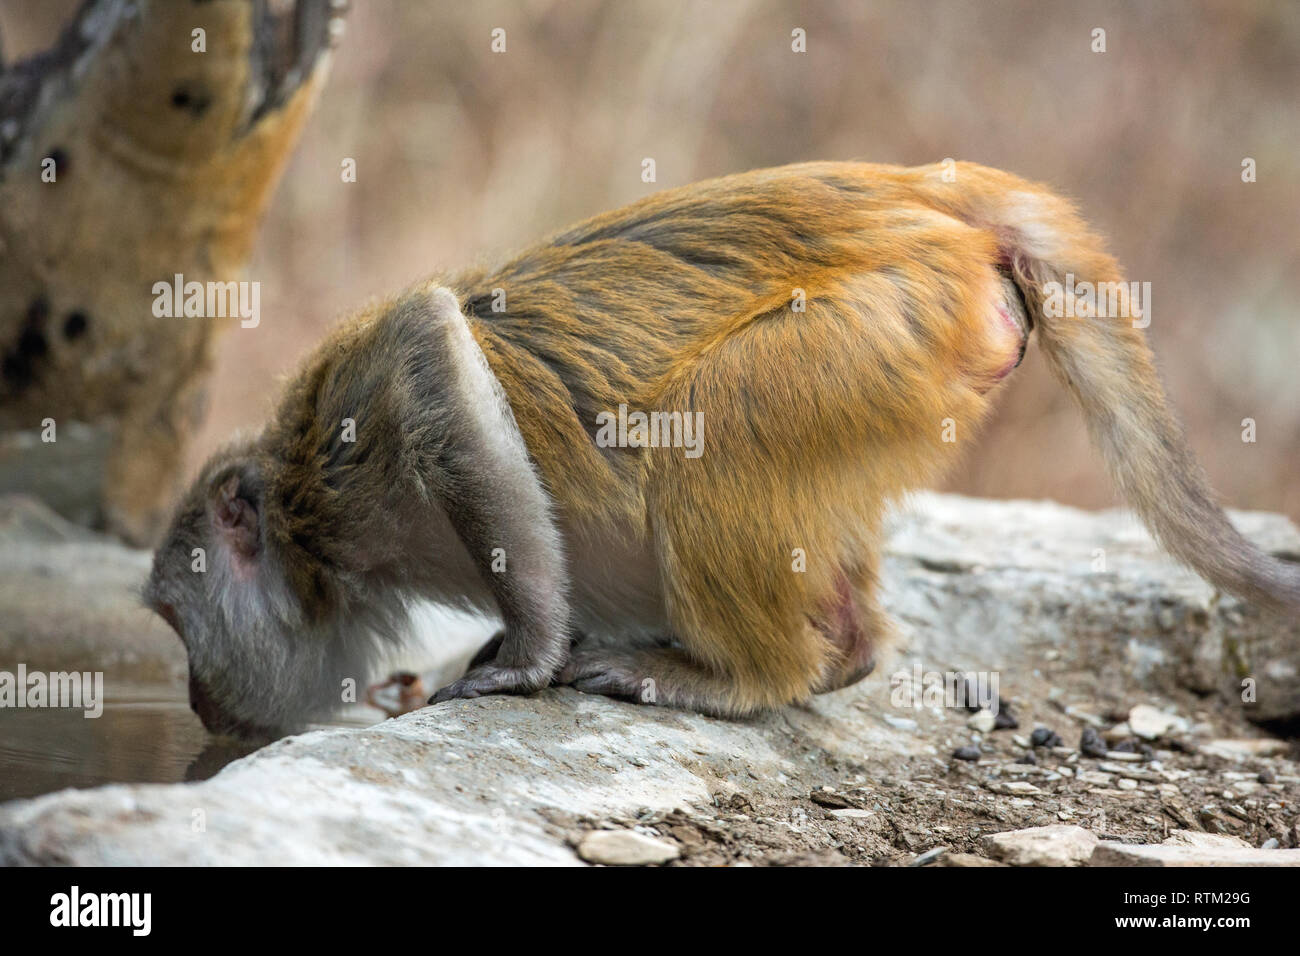 Rhesus Macaque (Macaca mulatta). On all fours, leaning forward to drink directly from a pool of water. Sitting, squatting, on all four limbs. Vulnerable position. Restricted vision re. predation. Stock Photo